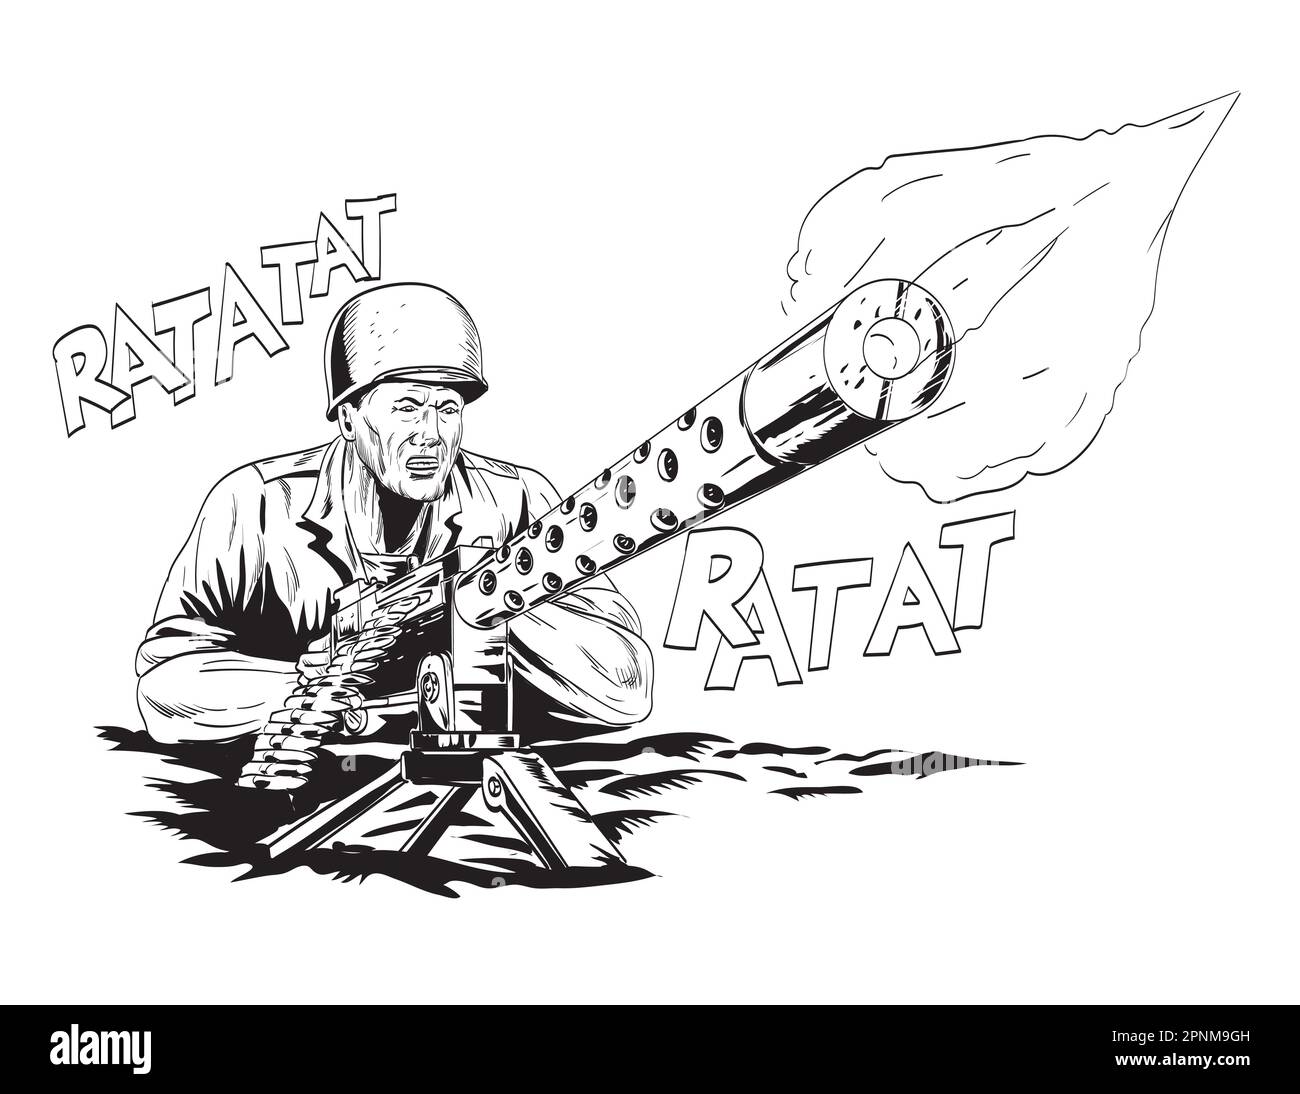 Comics style drawing or illustration of a World War Two American GI soldier aiming firing a machine gun viewed from front on low angle on isolated bac Stock Photo